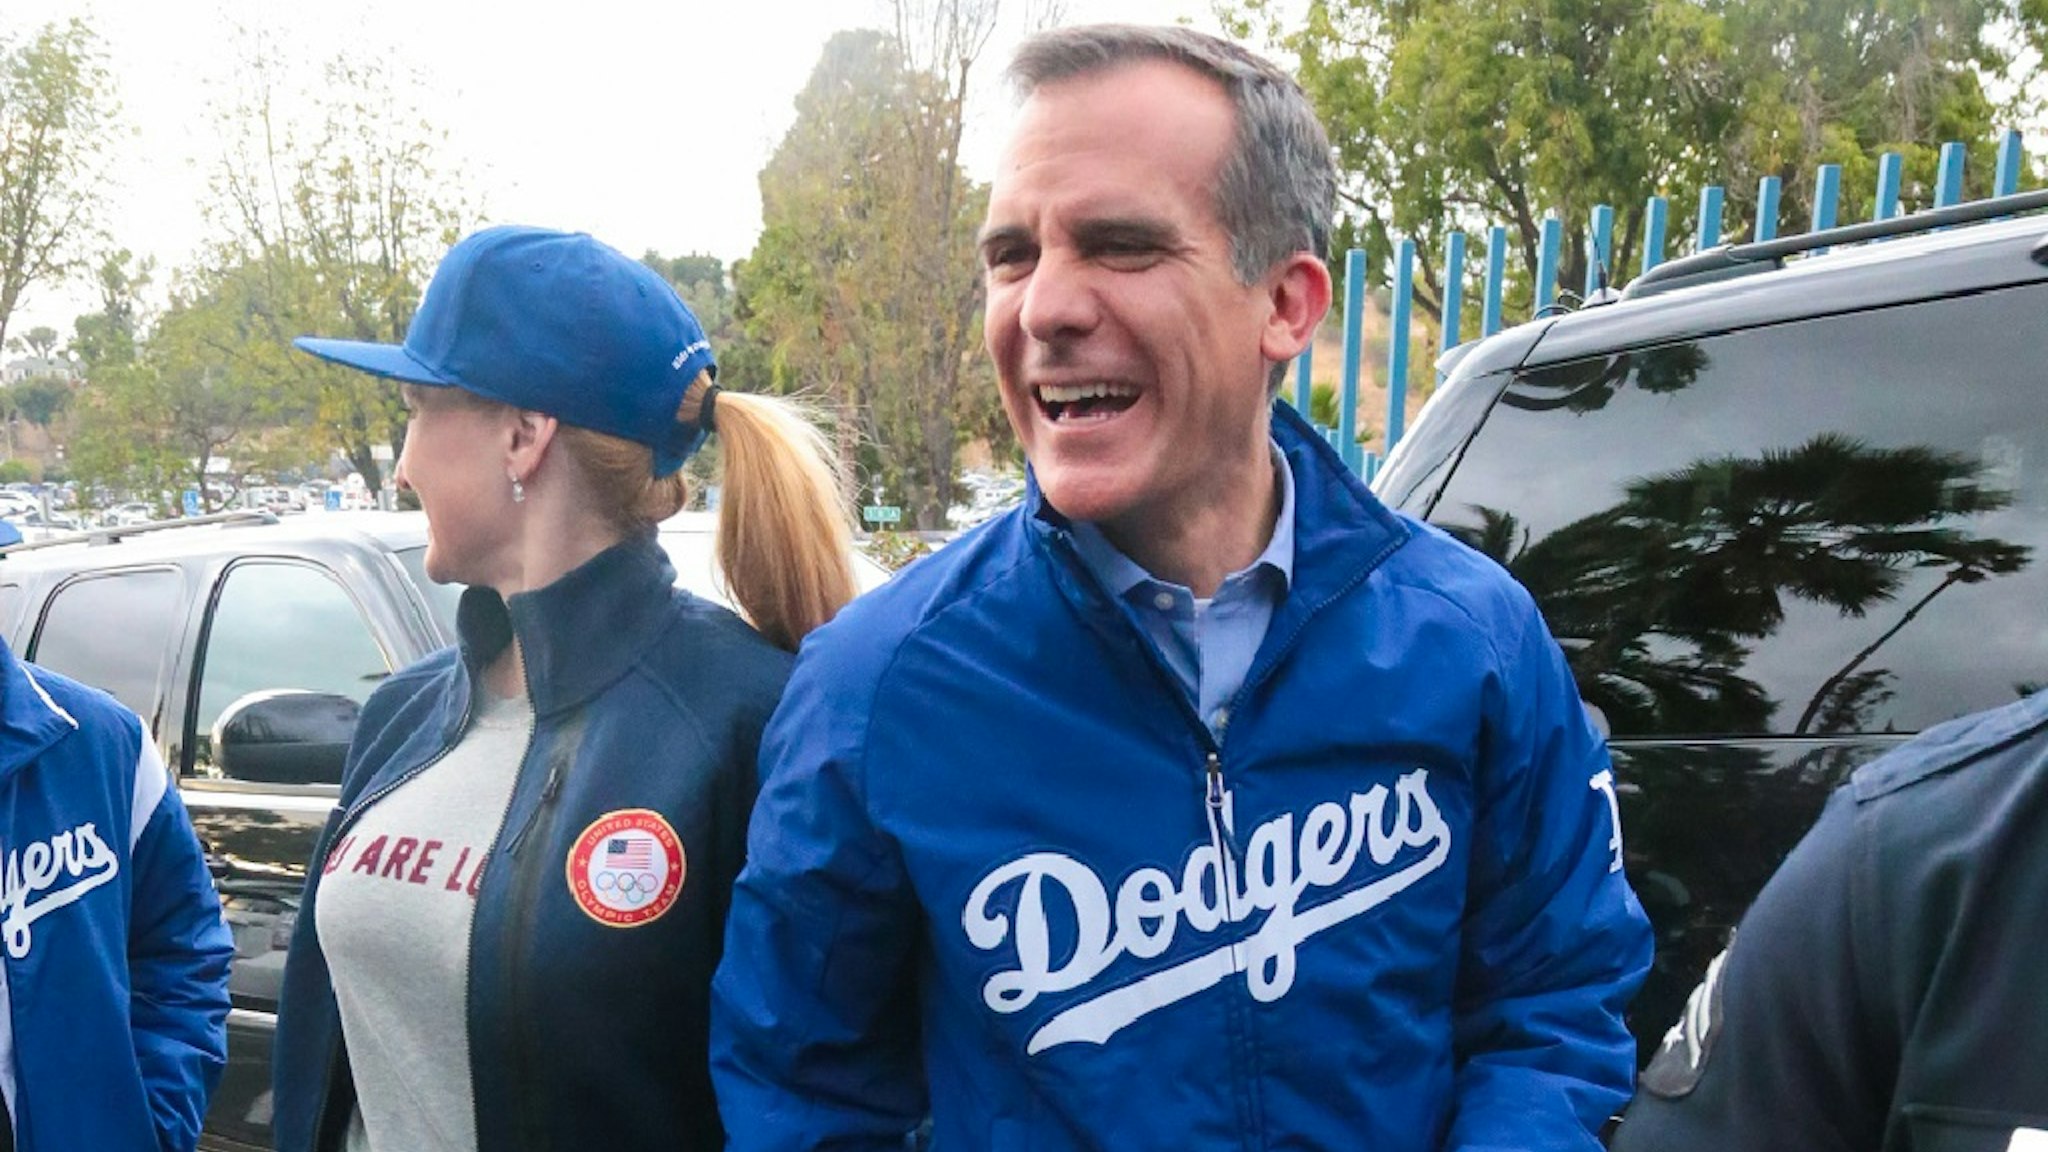 LOS ANGELES, CA - NOVEMBER 01: Eric Garcetti is seen arriving to Game 7 of the 2017 World Series between the Houston Astros and the Los Angeles Dodgers at Dodger Stadium on November 01, 2017 in Los Angeles, California.